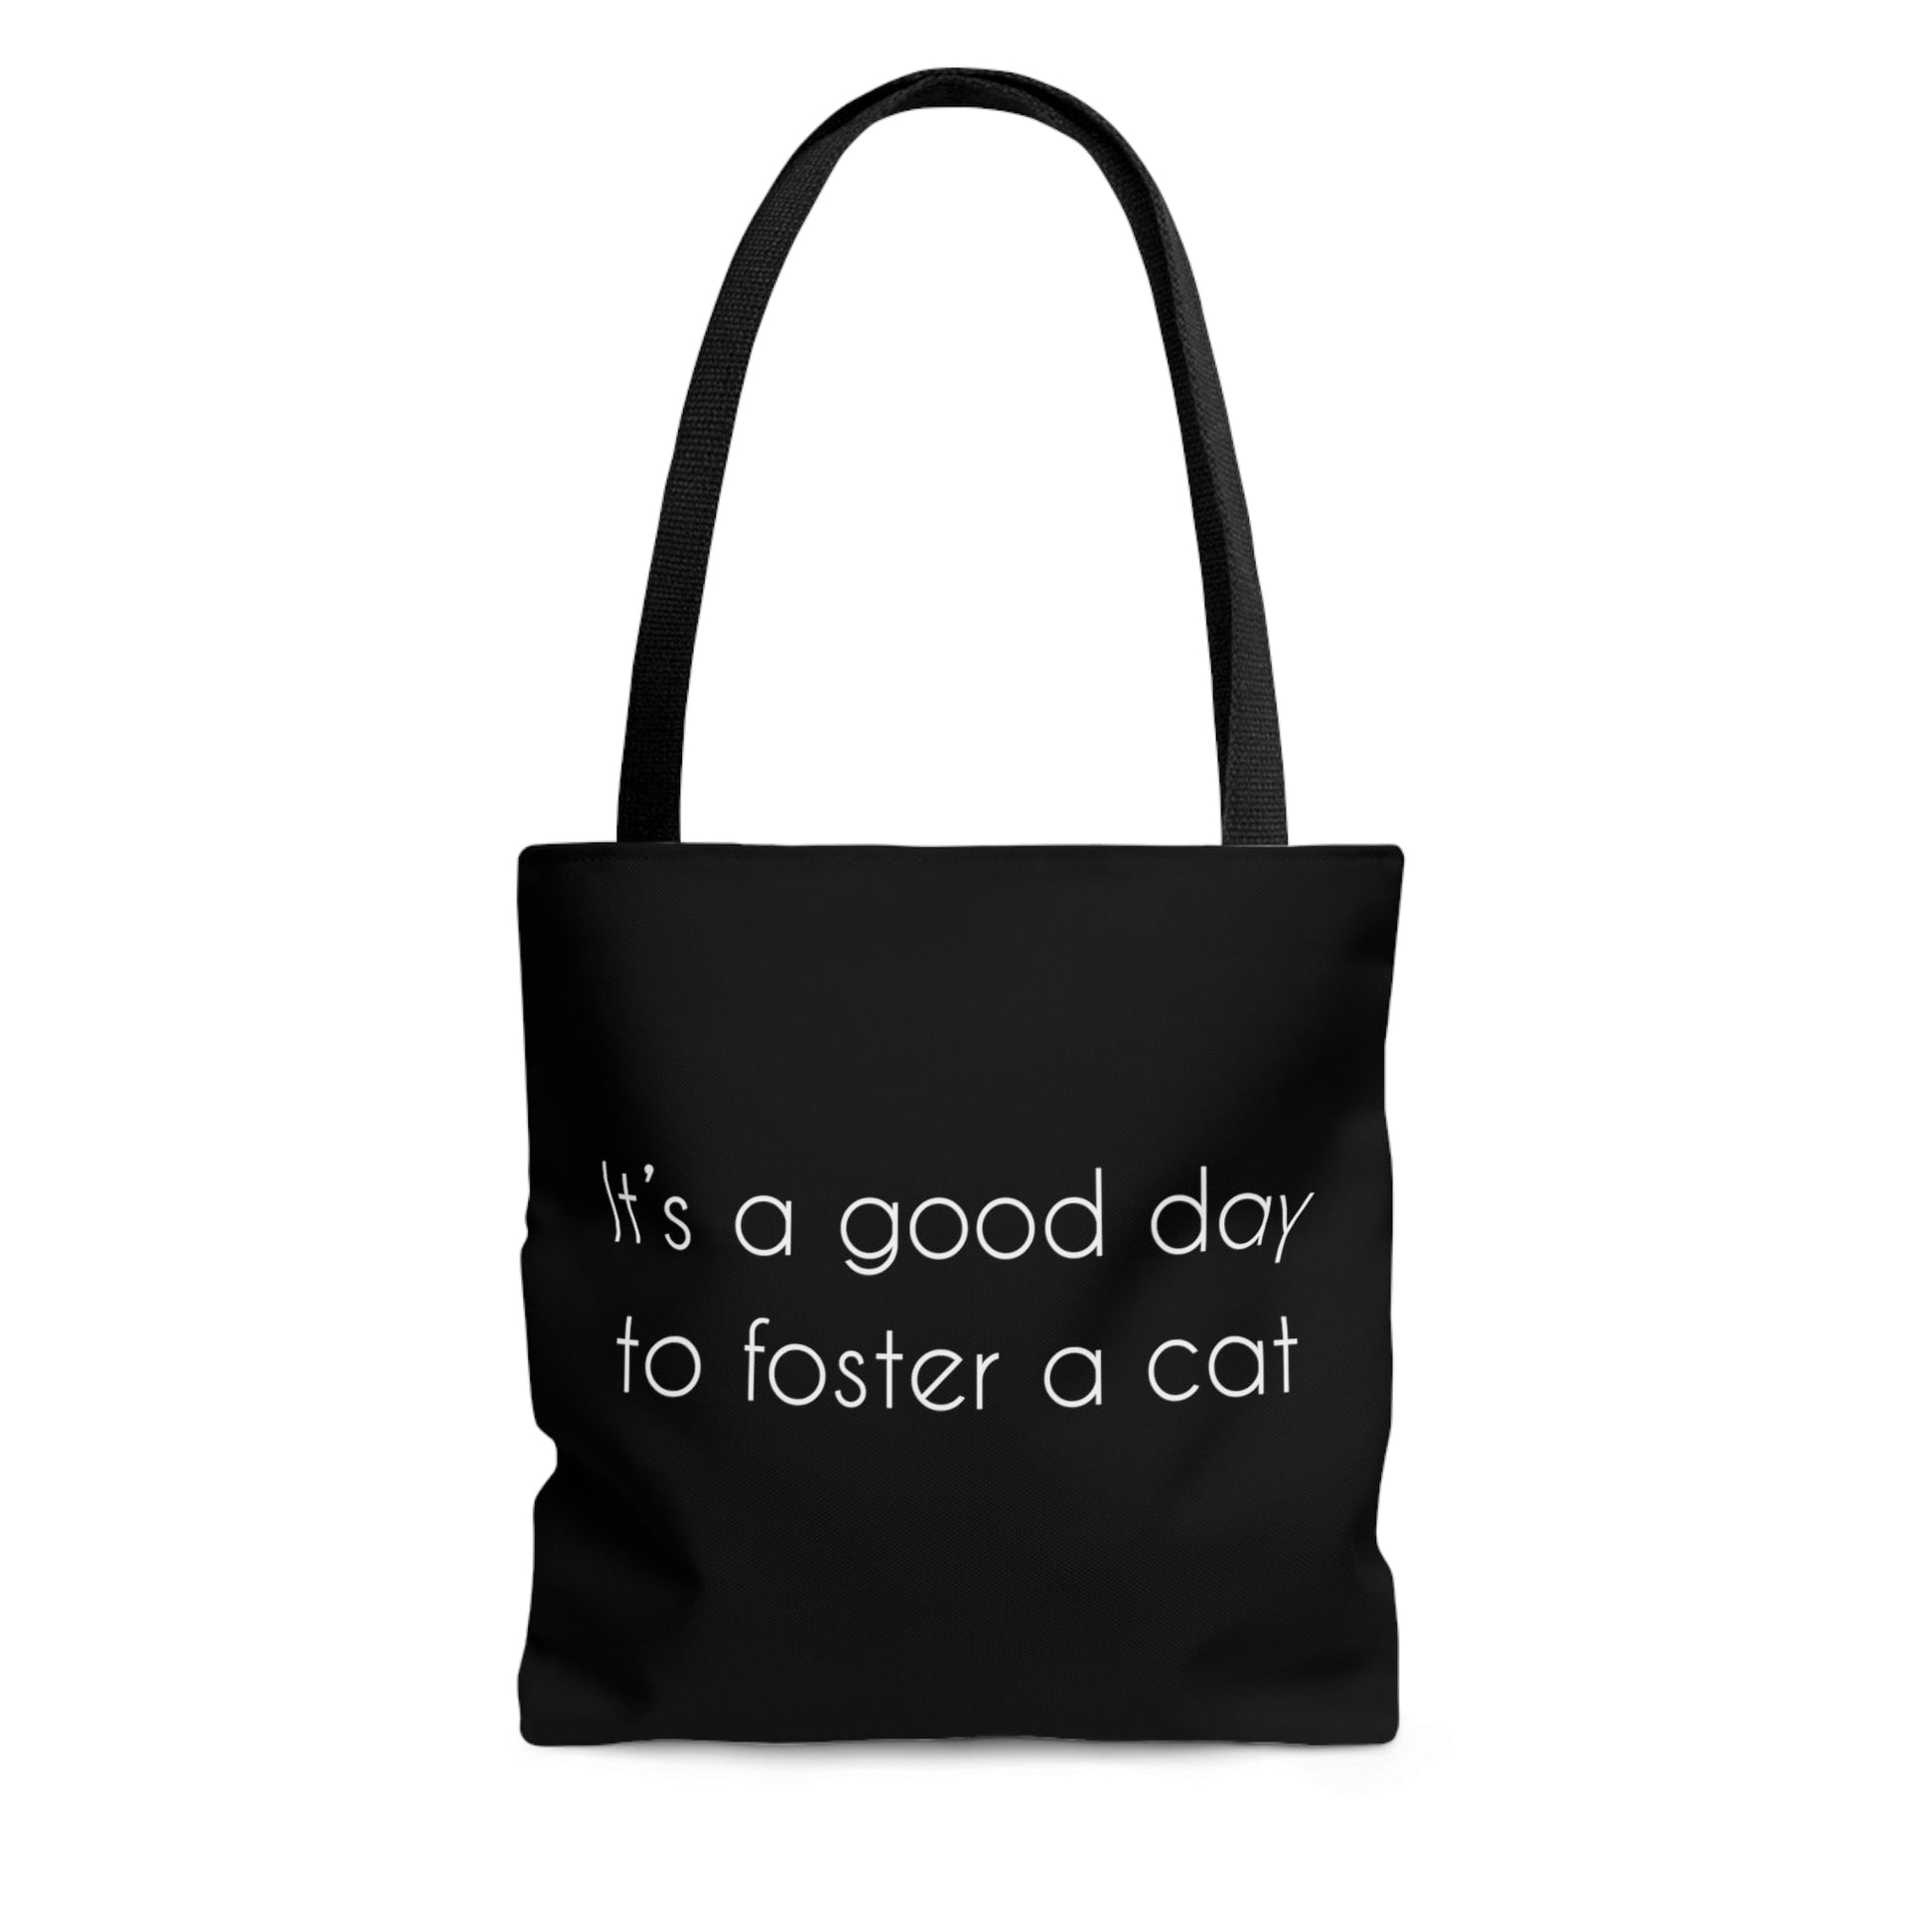 It's A Good Day To Foster A Cat | Tote Bag - Detezi Designs-20983716238059203814